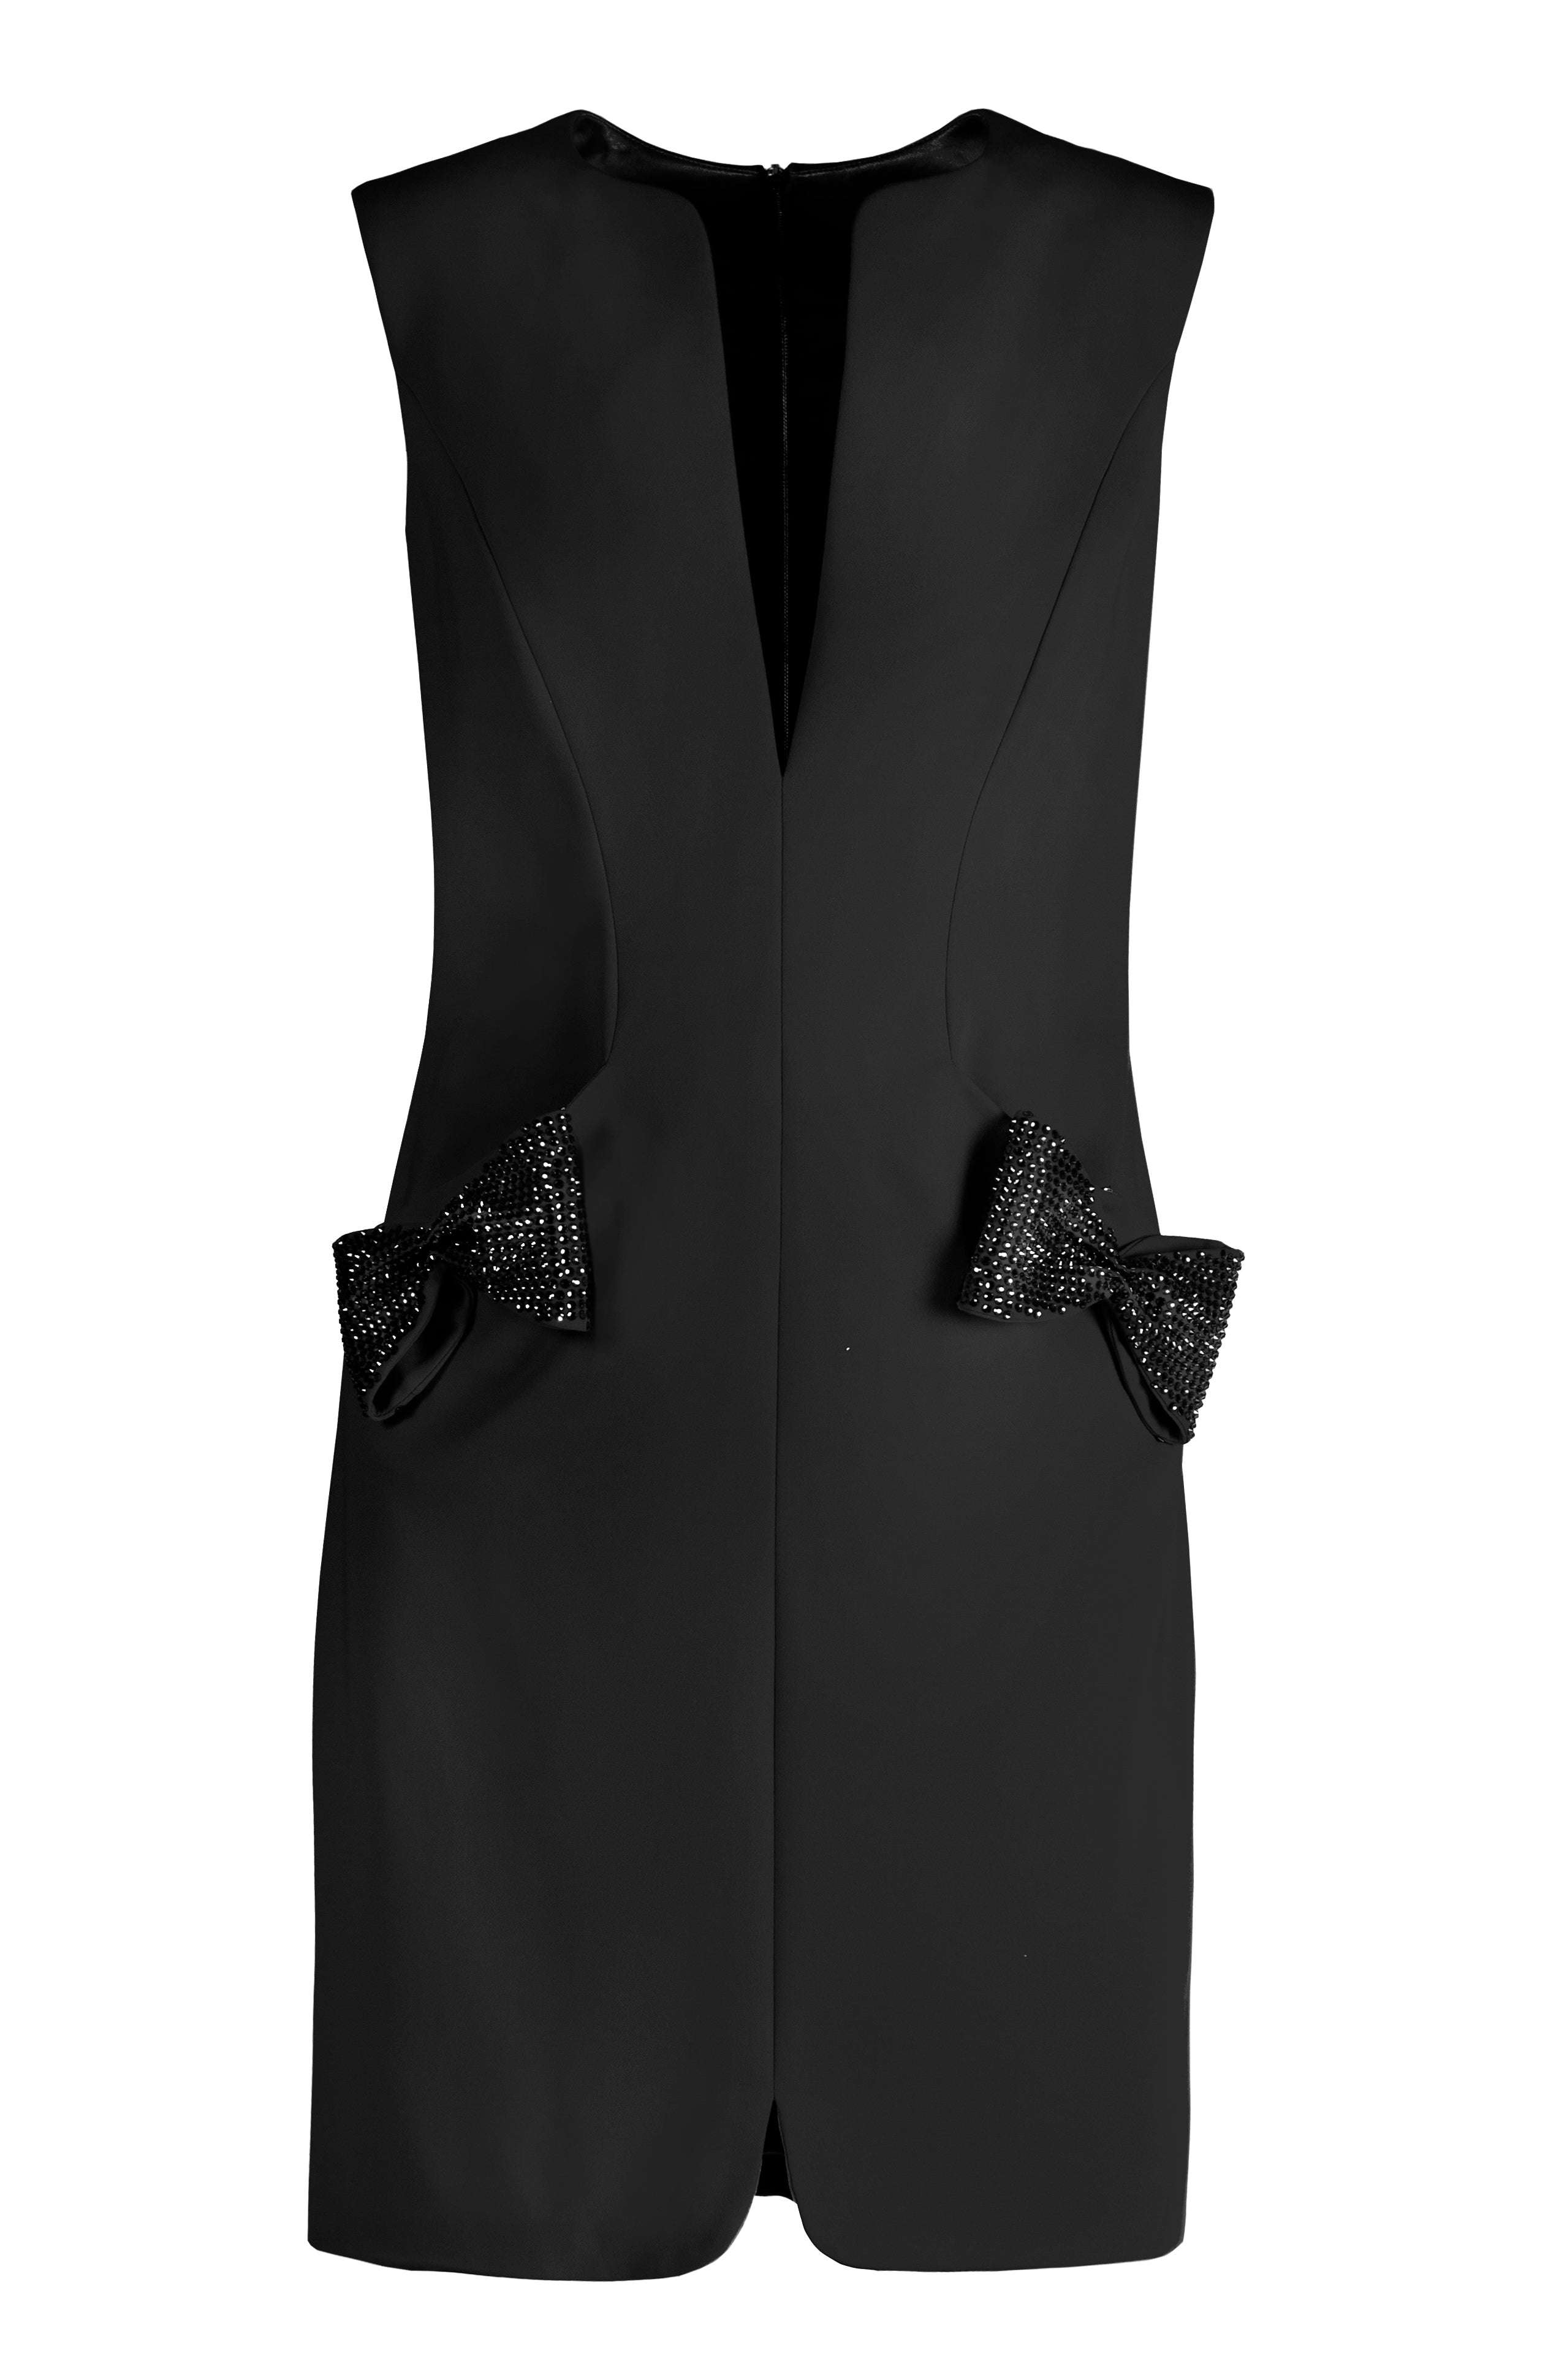 CREPE SLIP DRESS WITH BEADED BOWS AND POCKET DETAIL